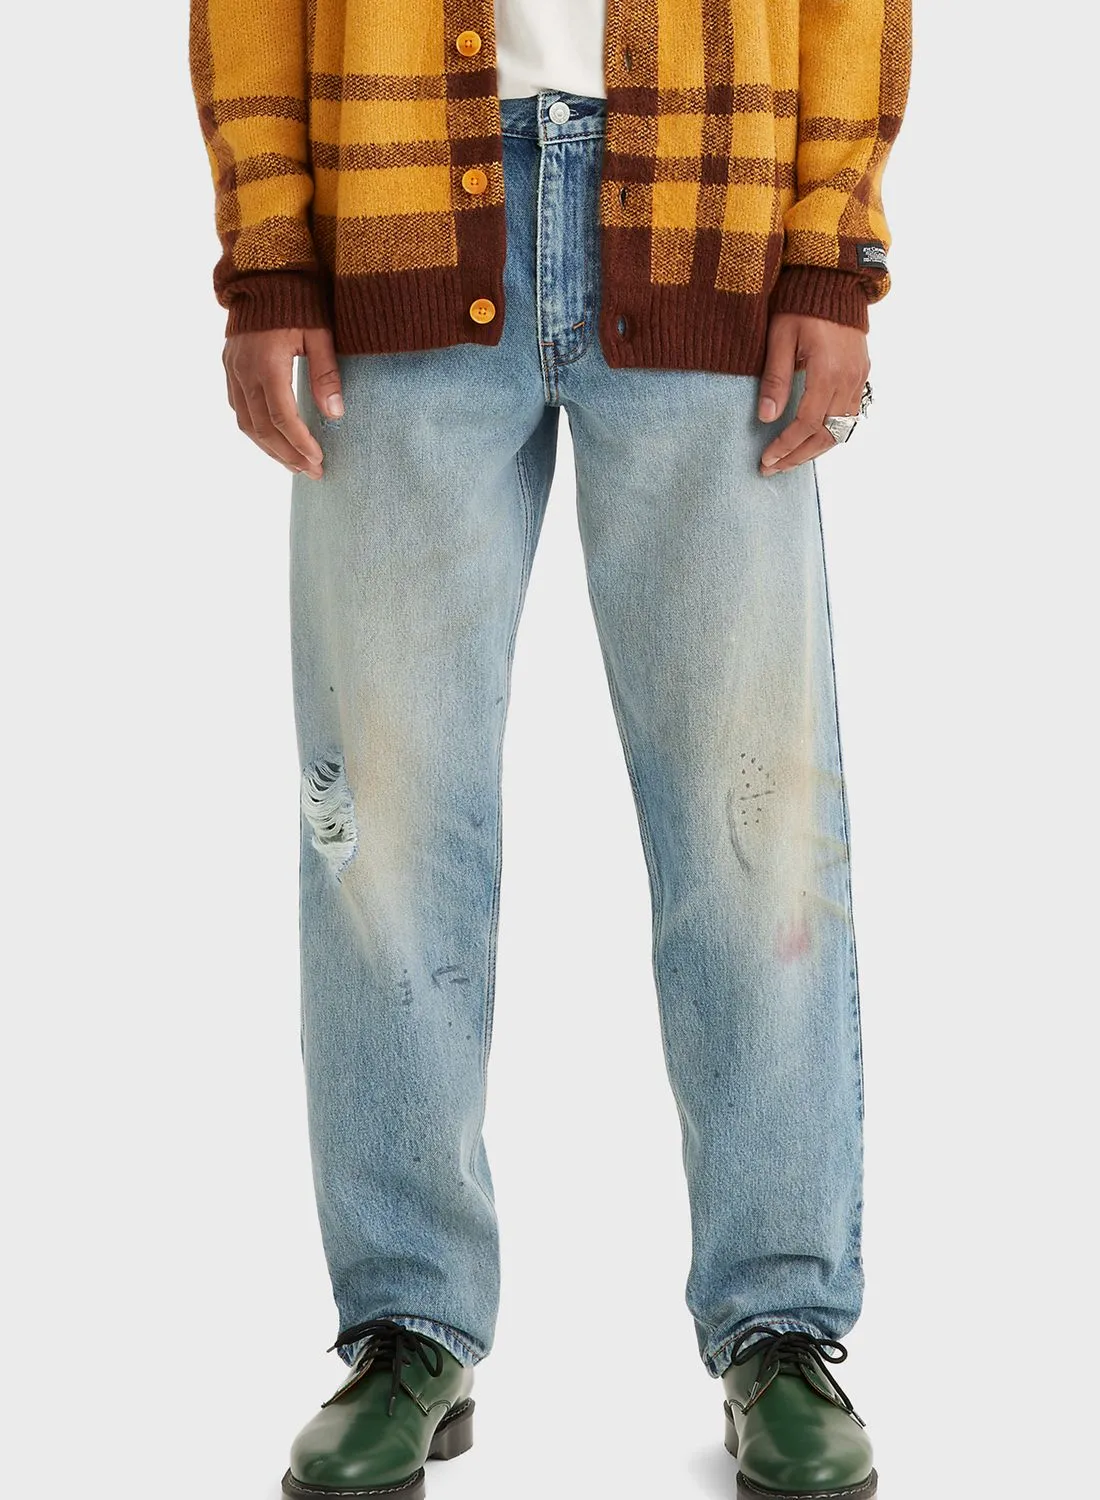 Levi's Light Wash Relaxed Fit Jeans